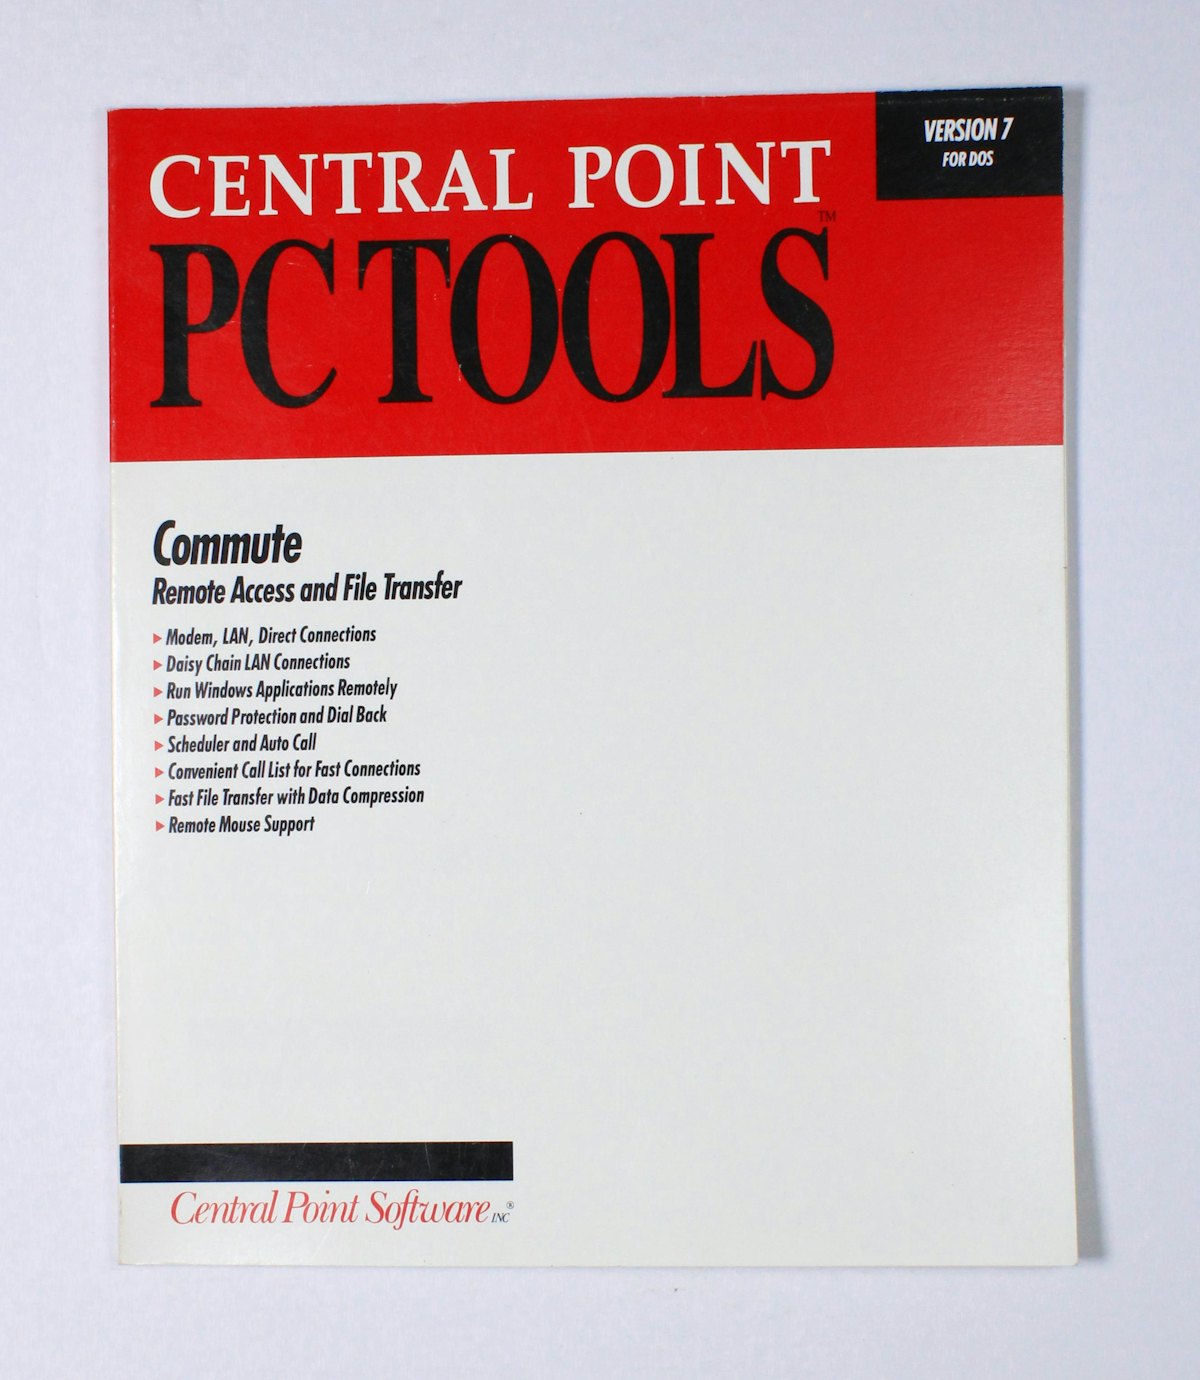 Central Point PC Tools: Commute (Remote Access and File Transfer)